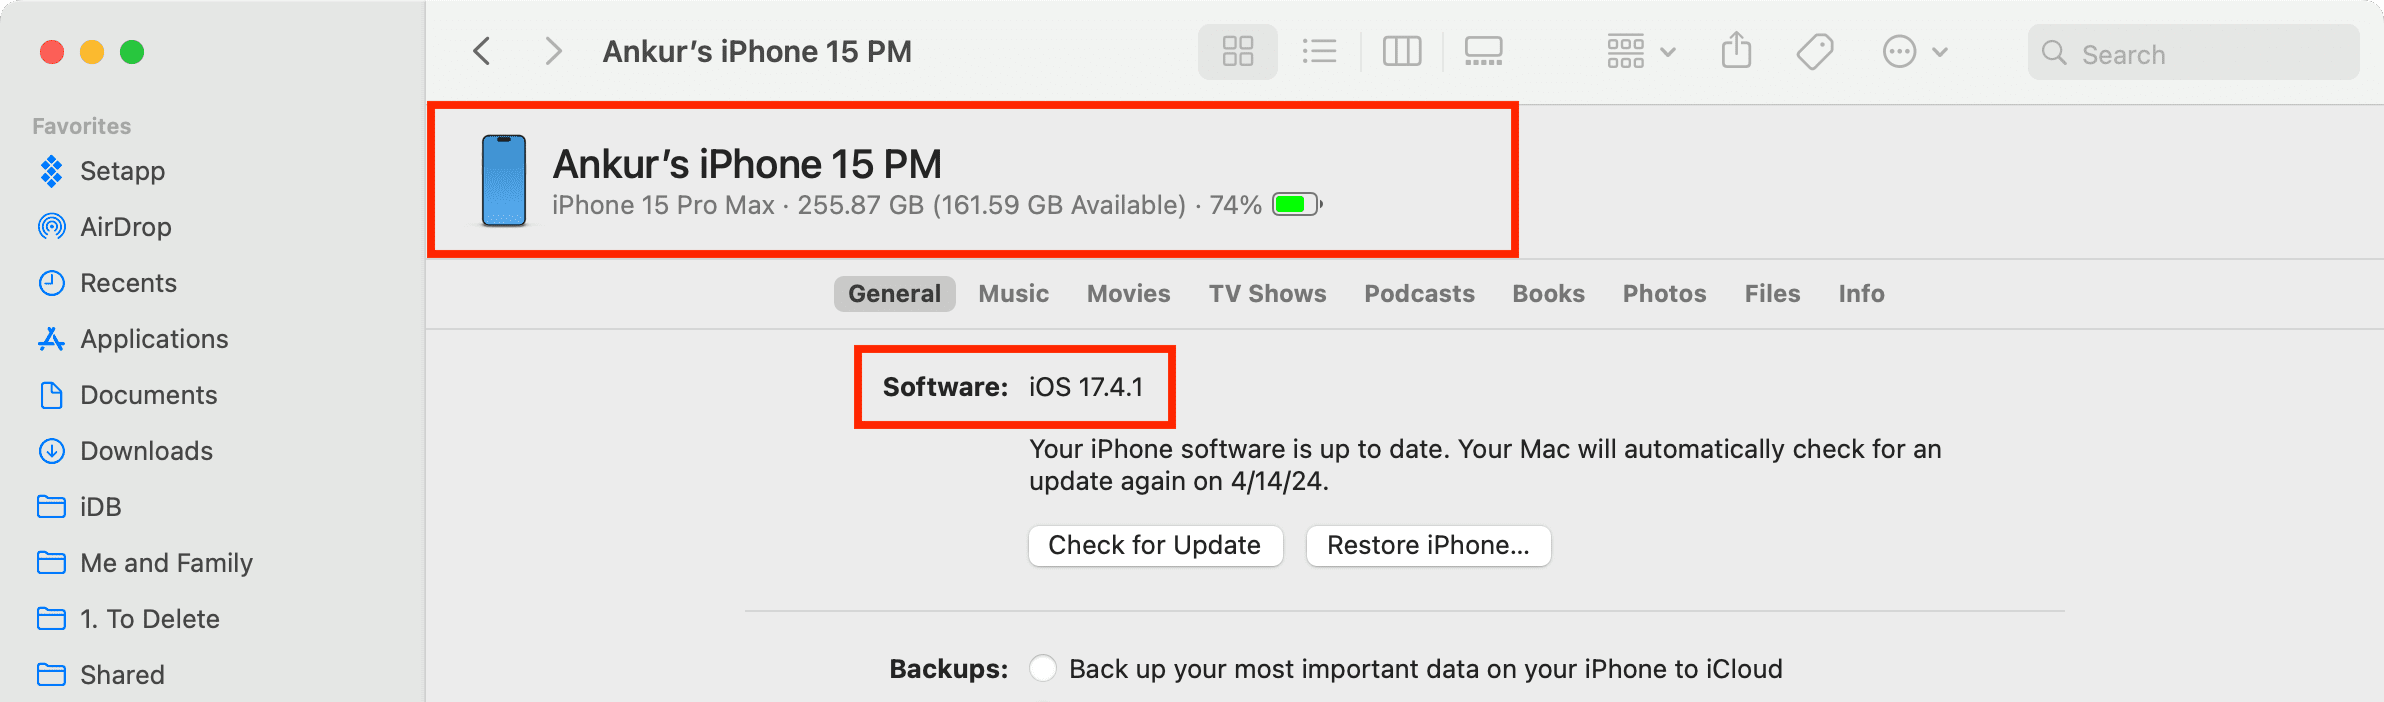 See iPhone details in Finder on Mac